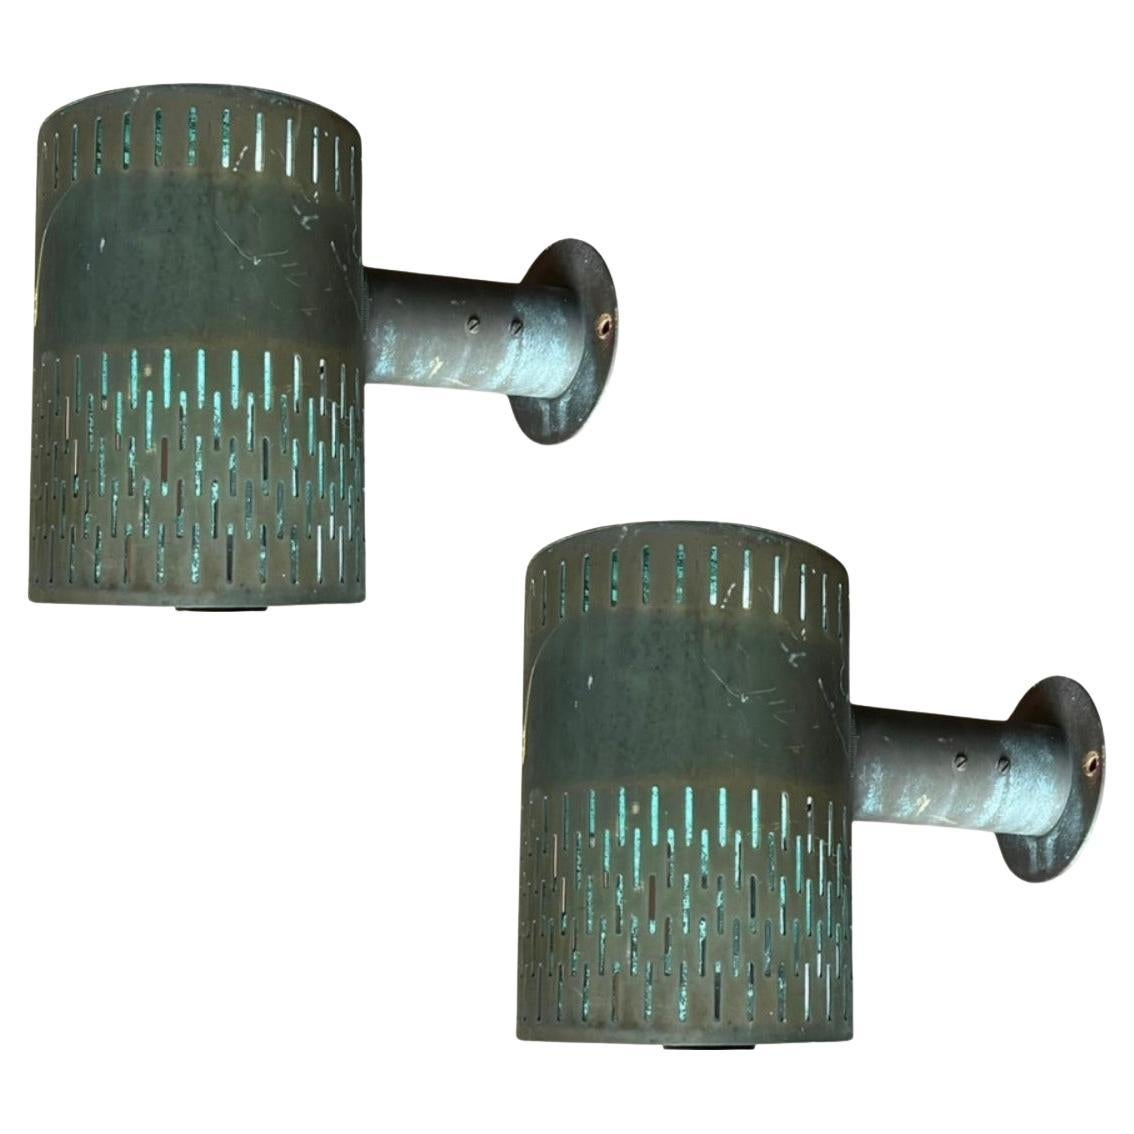 Pair of Copper Wall Lamps by Hans Bergström, Ateljé Lyktan 1940/50s Sweden Rare